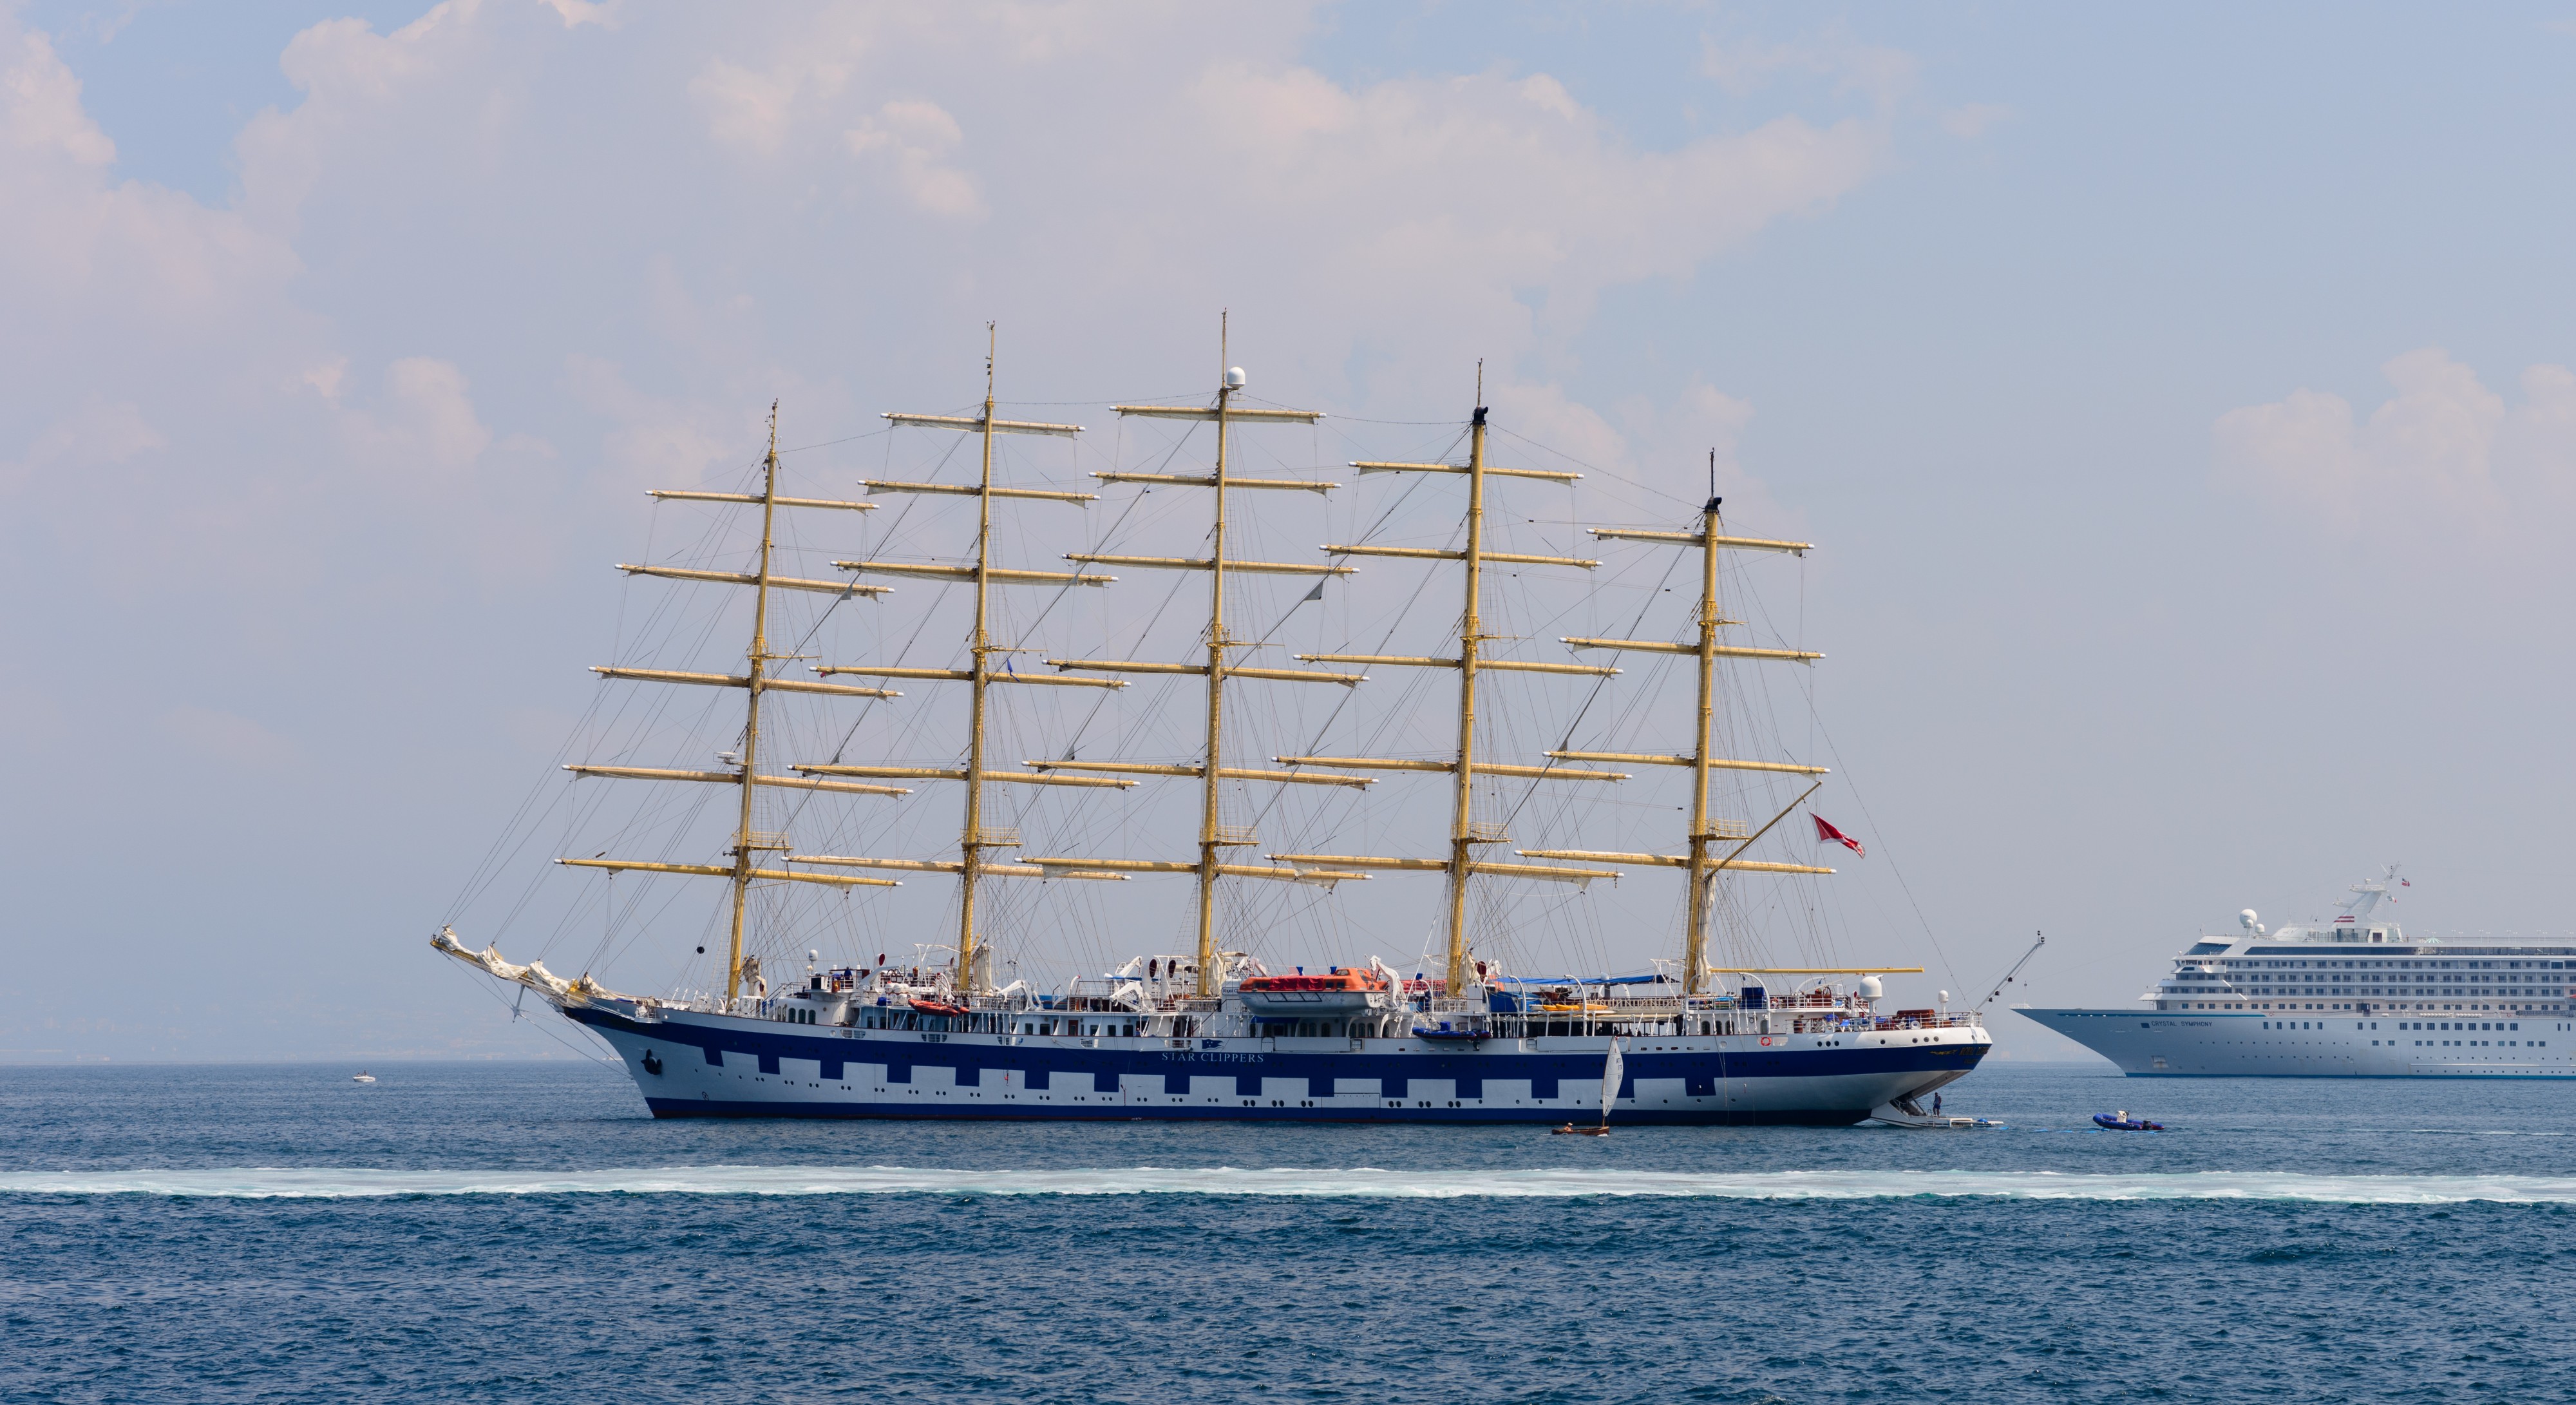 Royal Clipper of Star Clippers - Campania - Italy - July 12th 2013